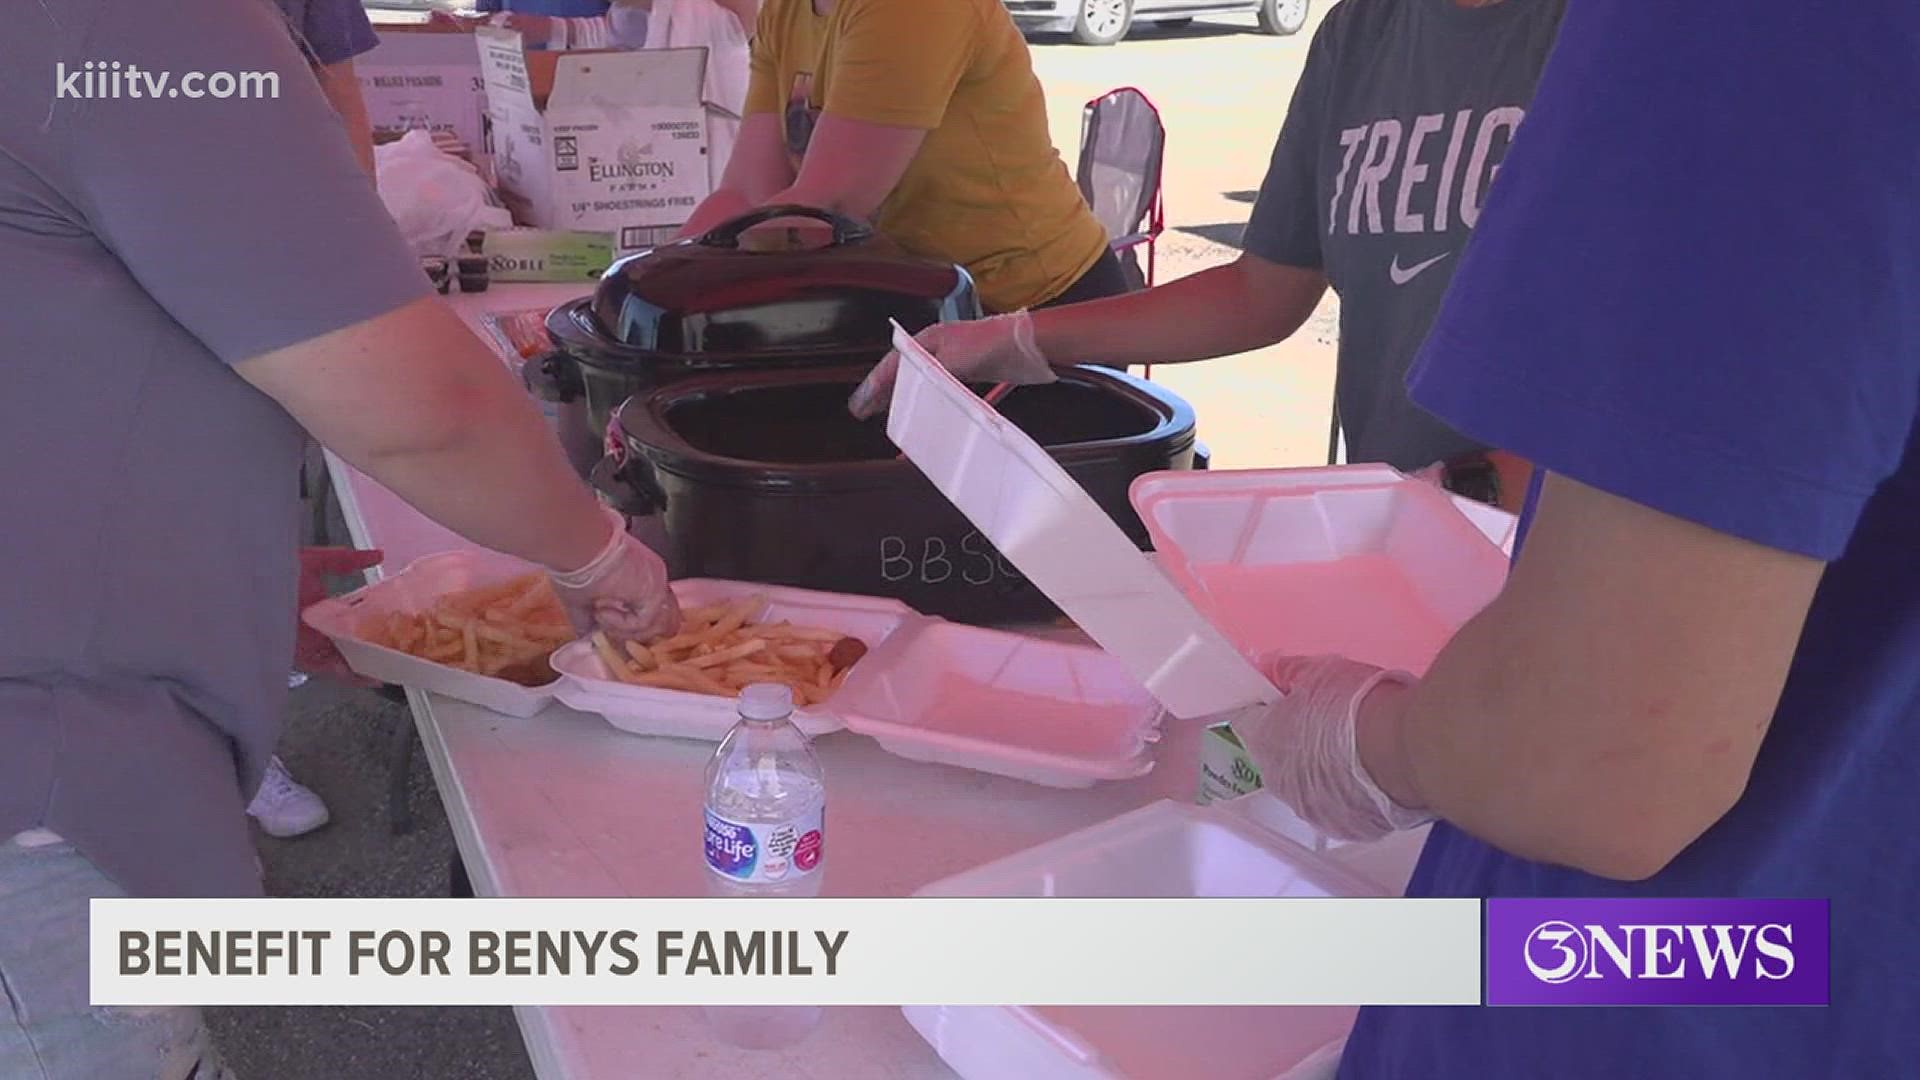 All proceeds from the fish fry will go towards supporting the Benys family during these difficult days.